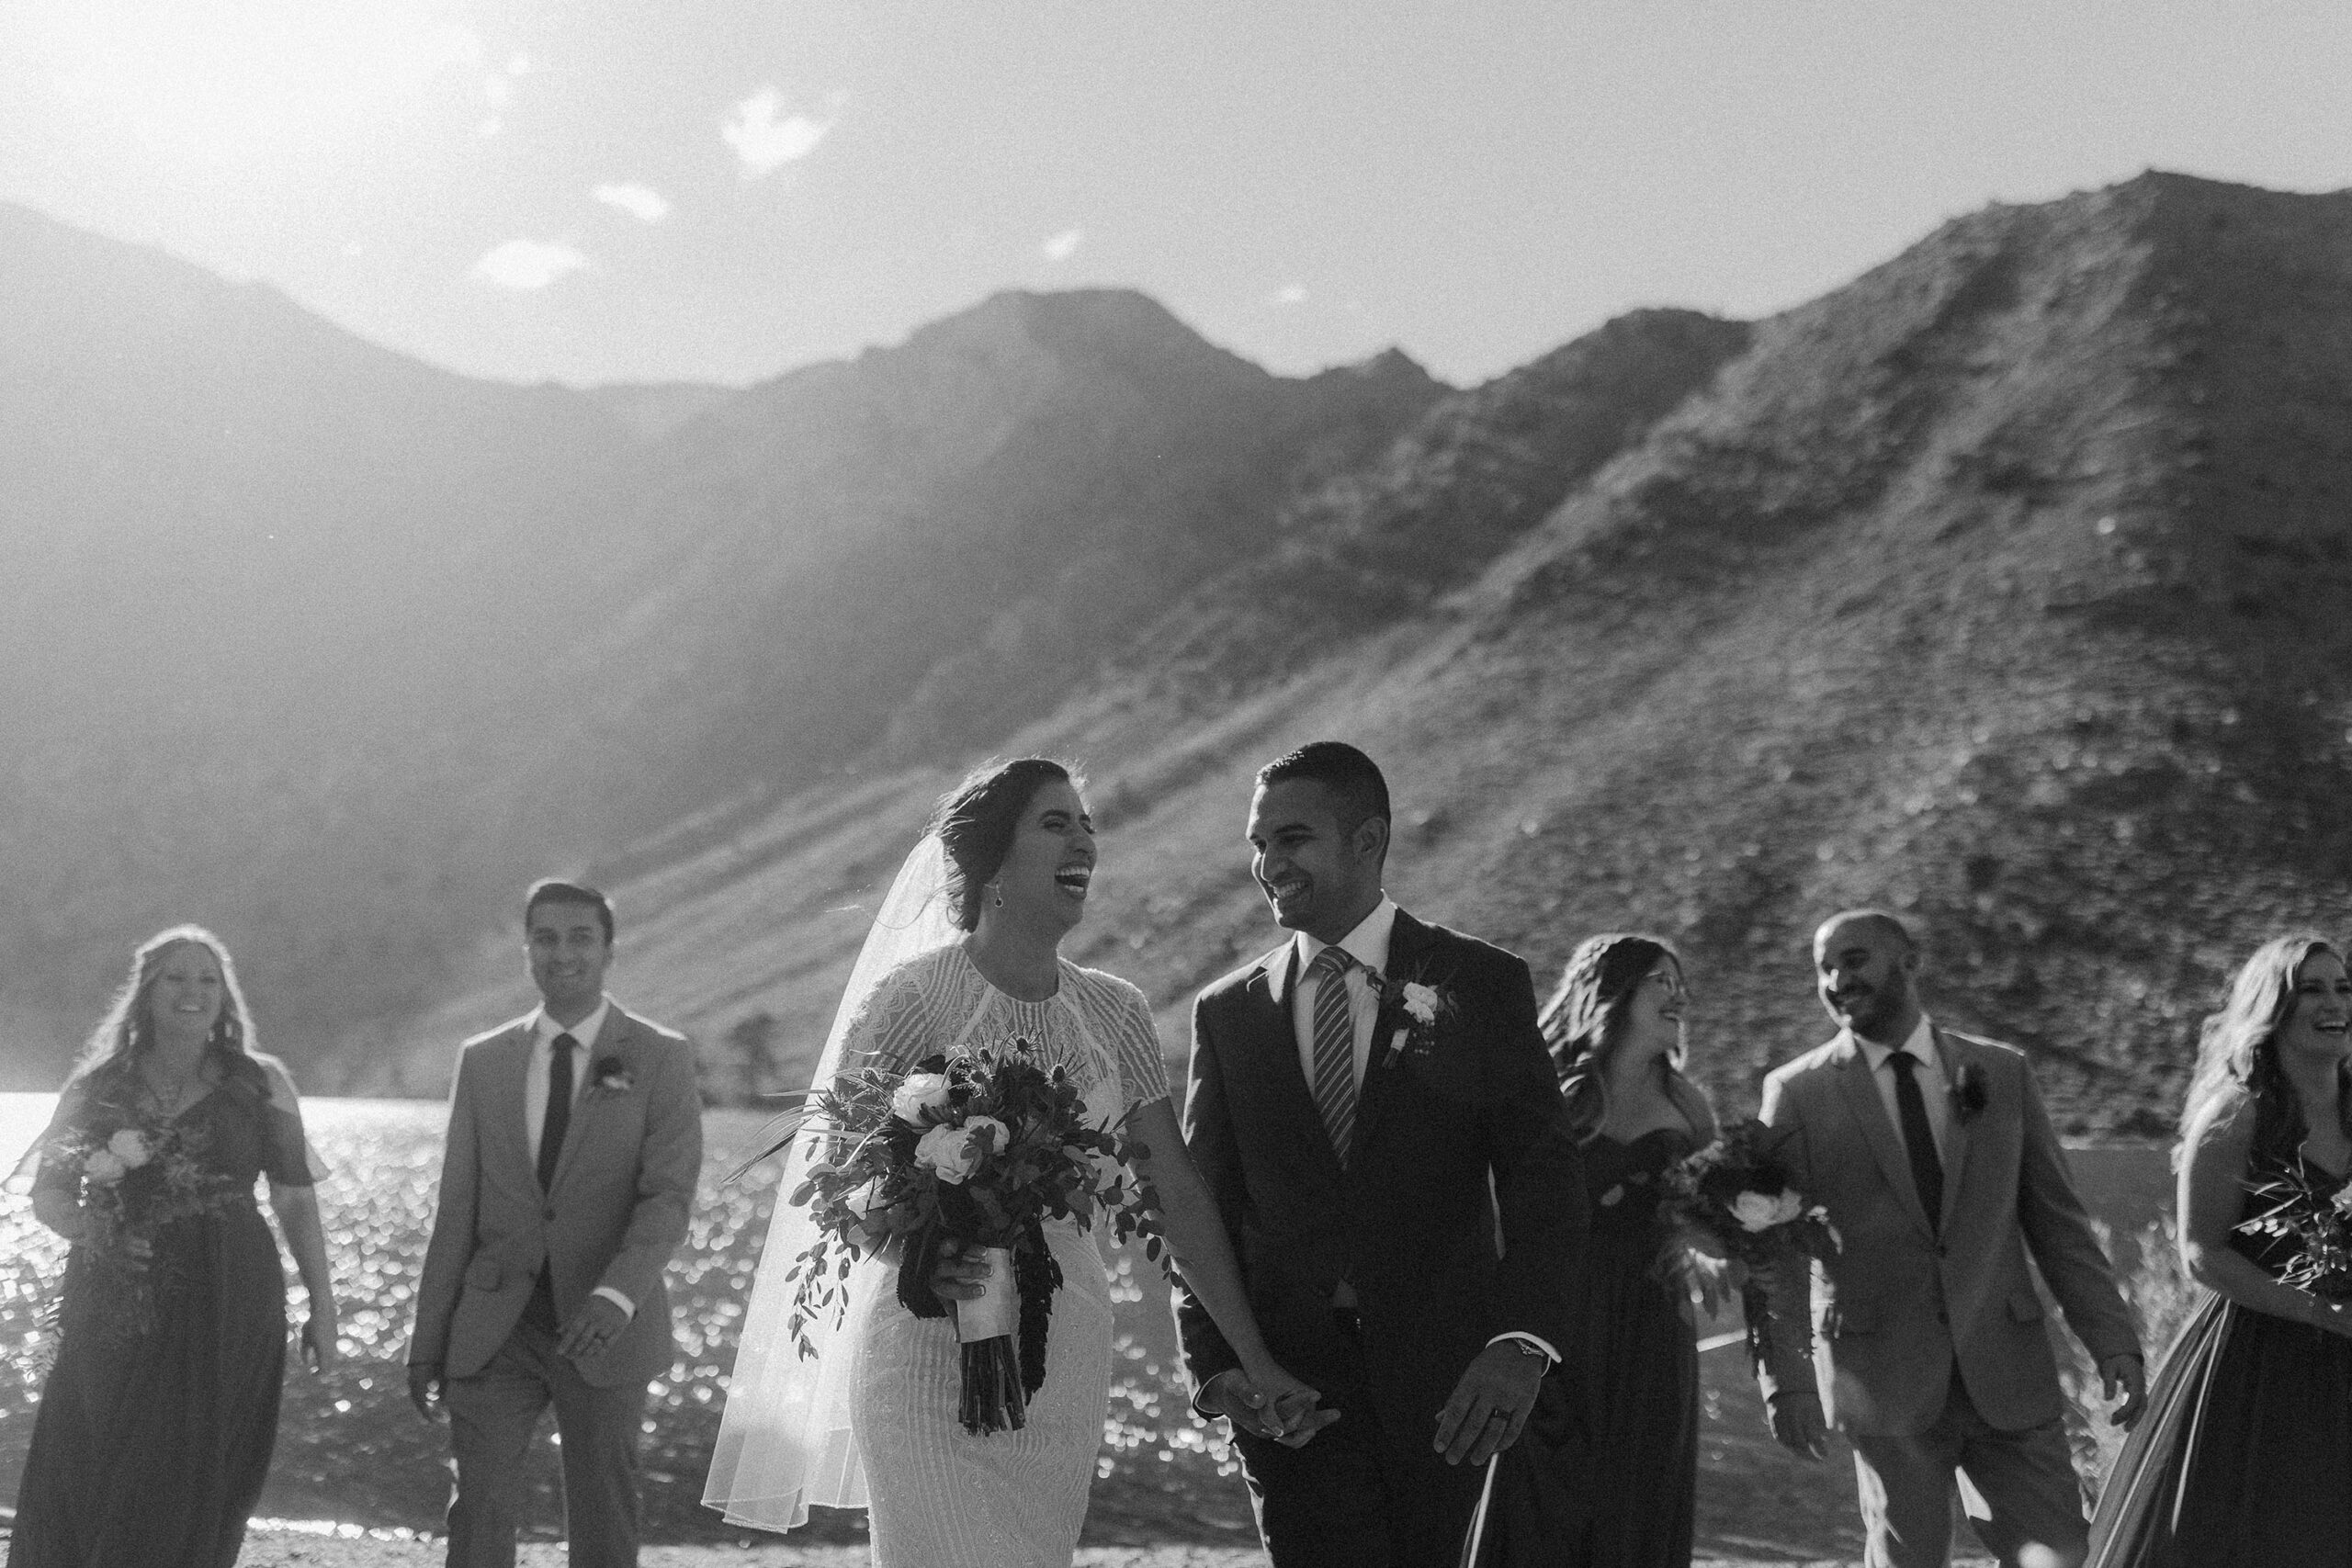 A candid image of a Bride and Groom with their bridal party laughing by Convict Lake